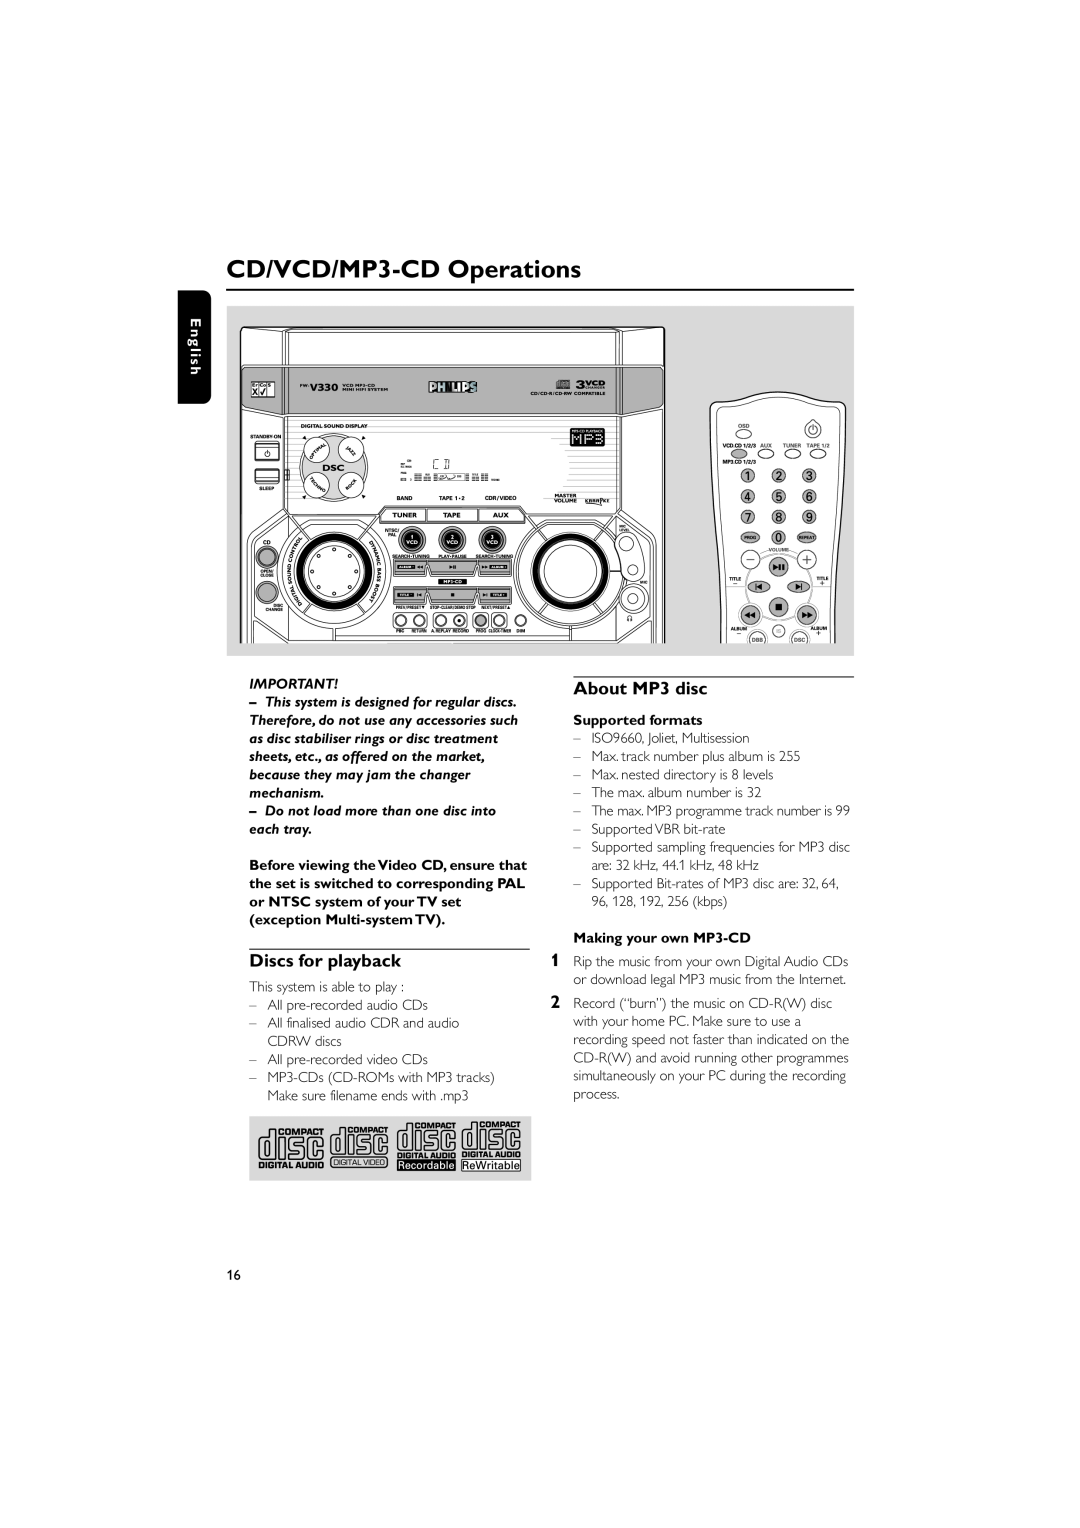 Philips FW-V330 manual CD/VCD/MP3-CD Operations, Discs for playback, About MP3 disc, English, Supported formats 